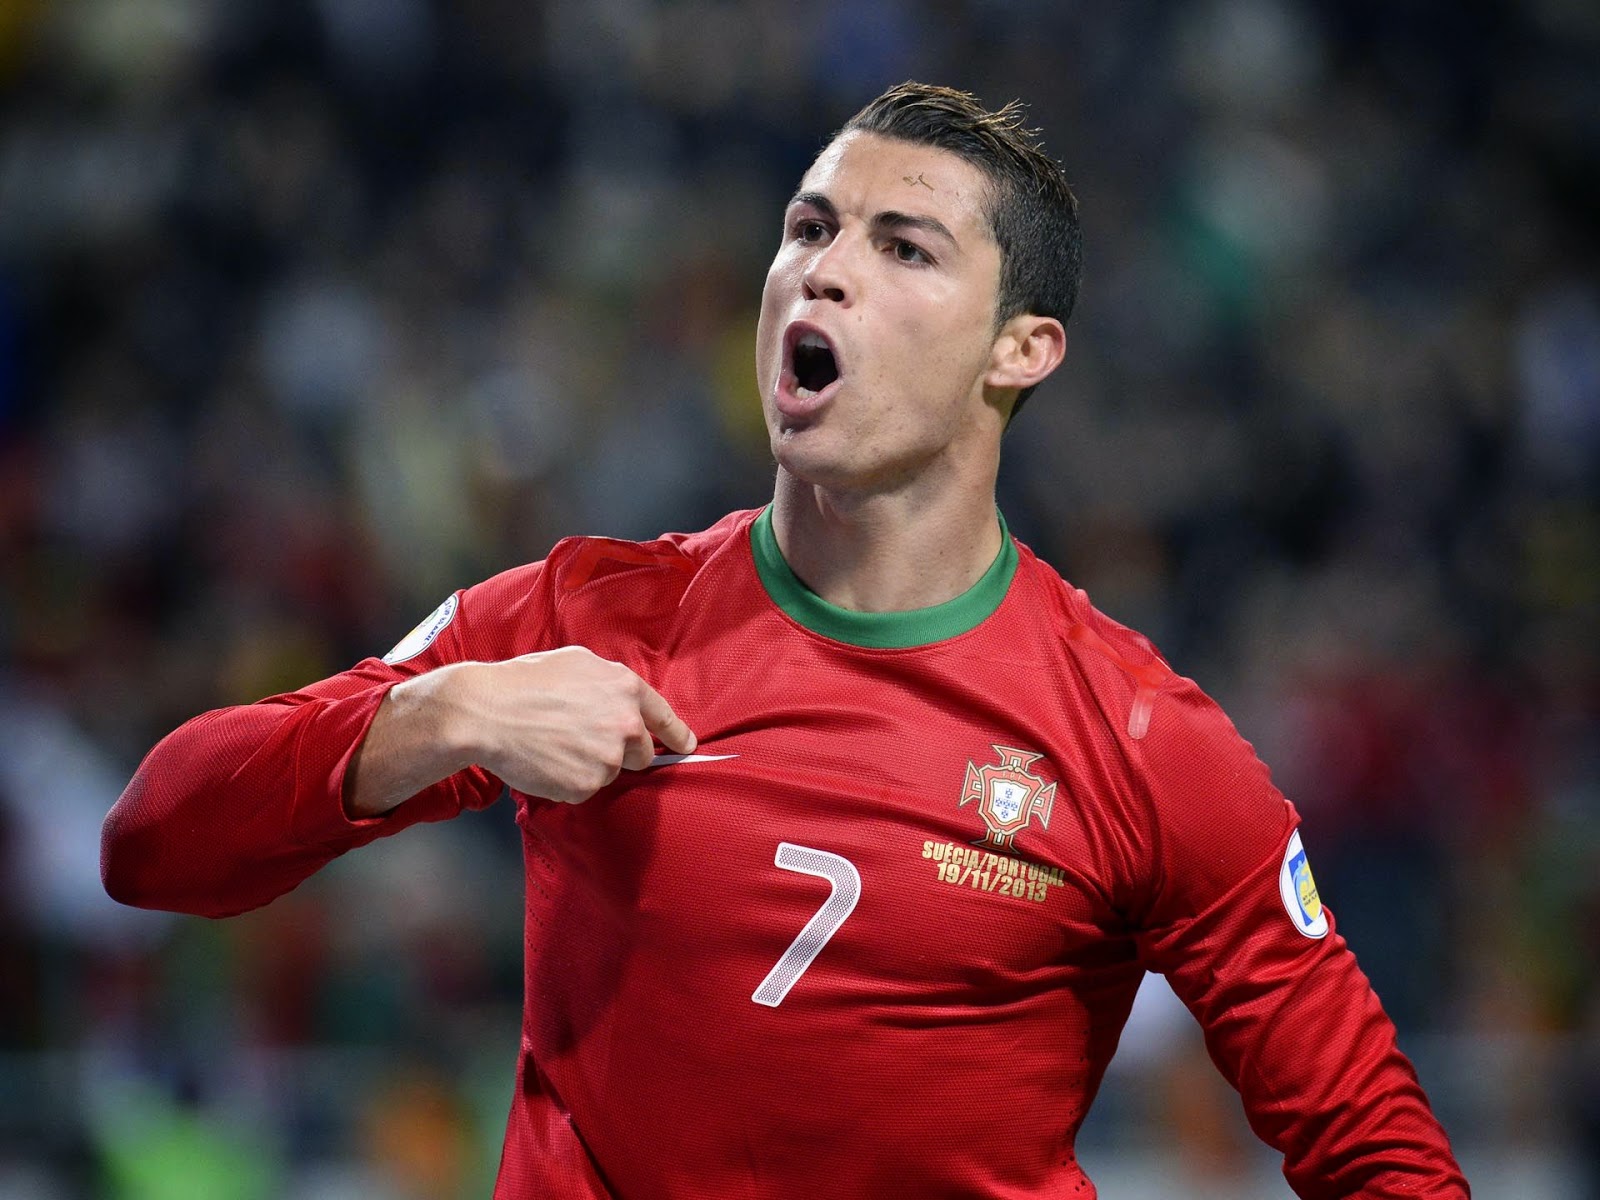 sr4 20102015 - Portugal coach Santos willing to gets the most out of his superstar Cristiano Ronaldo